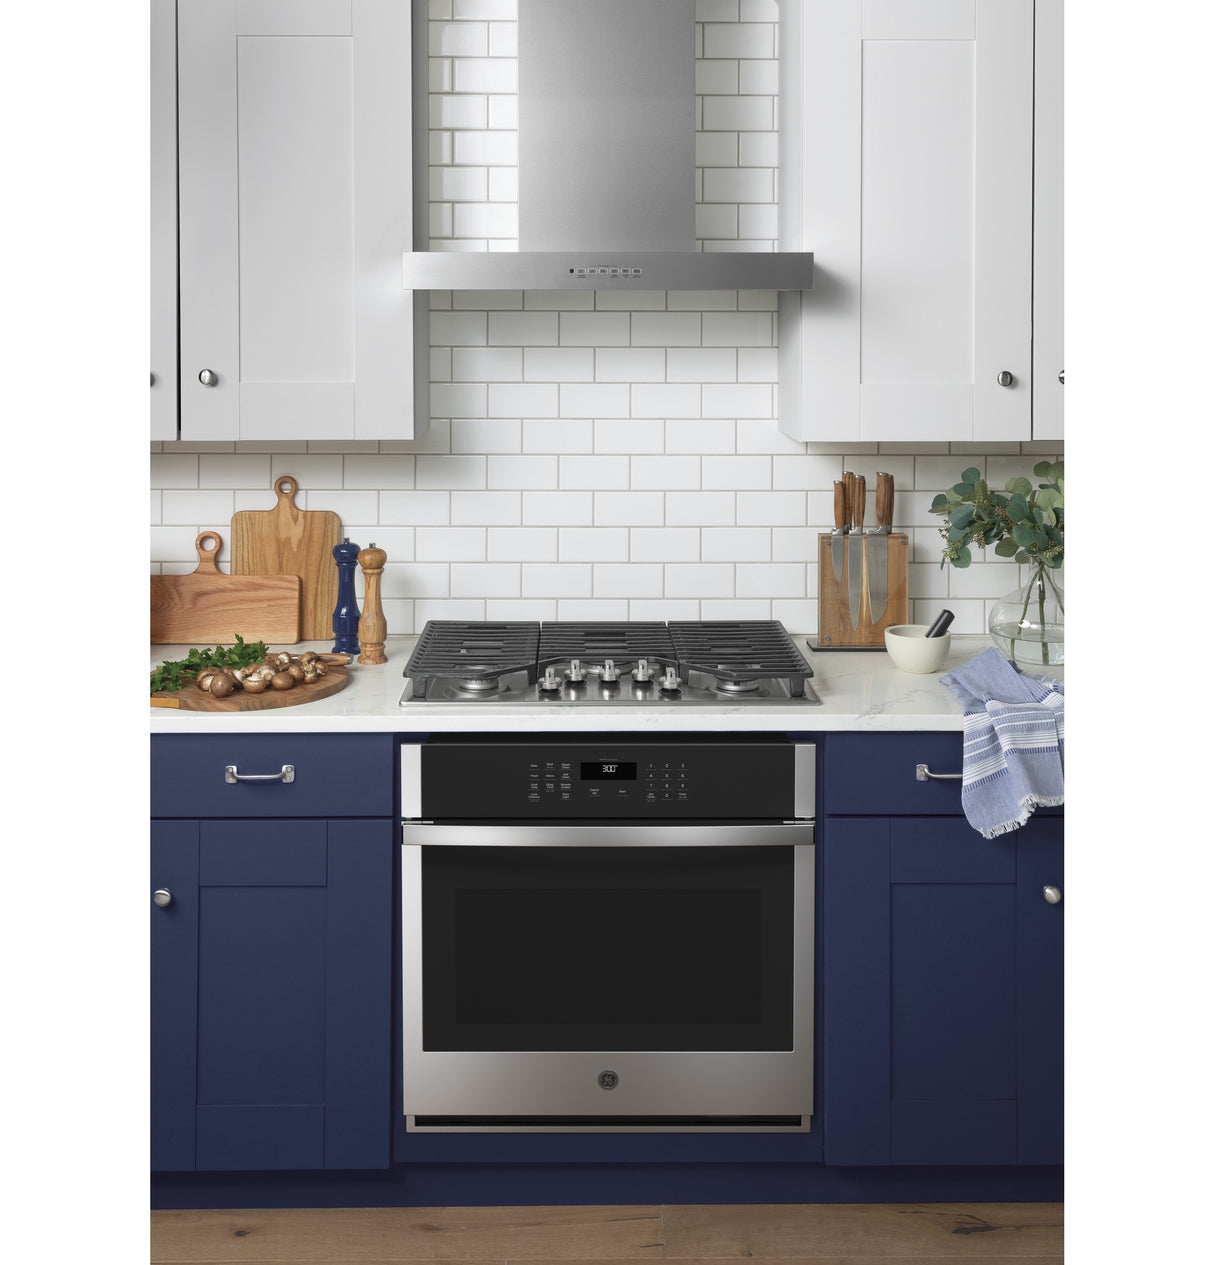 GE(R) 30" Smart Built-In Self-Clean Single Wall Oven with Never-Scrub Racks - (JTS3000SNSS)